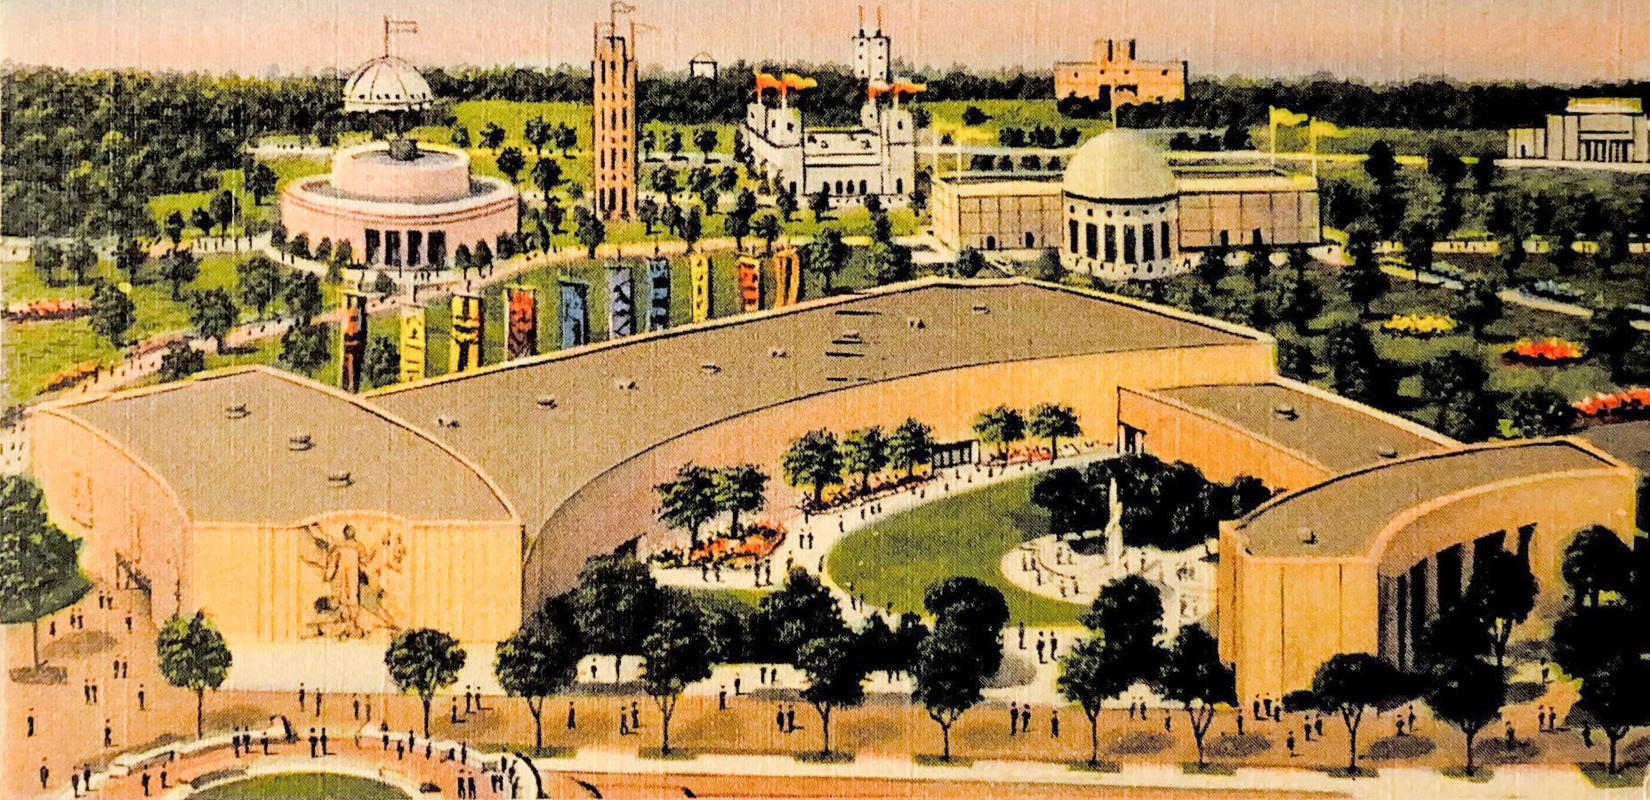 A vintage postcard map of the NYC World's Fair